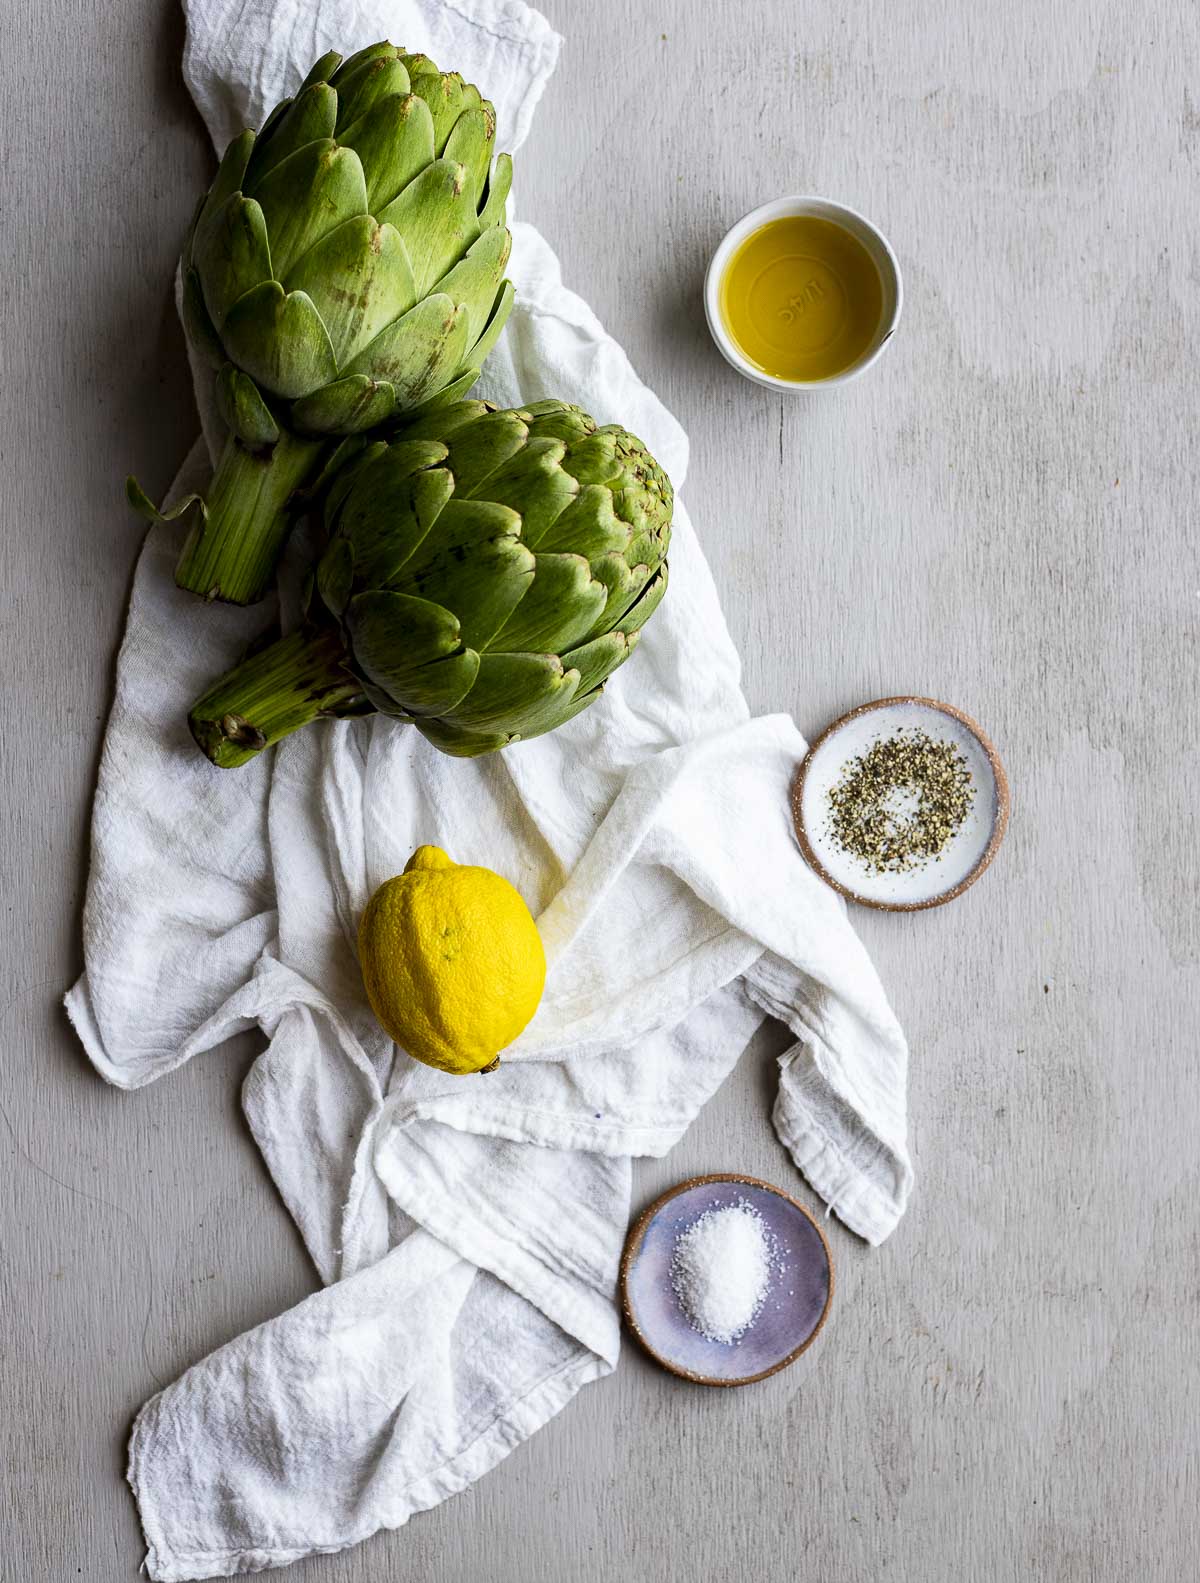 Ingredients to make air fryer artichokes arranged individually on a white cloth.